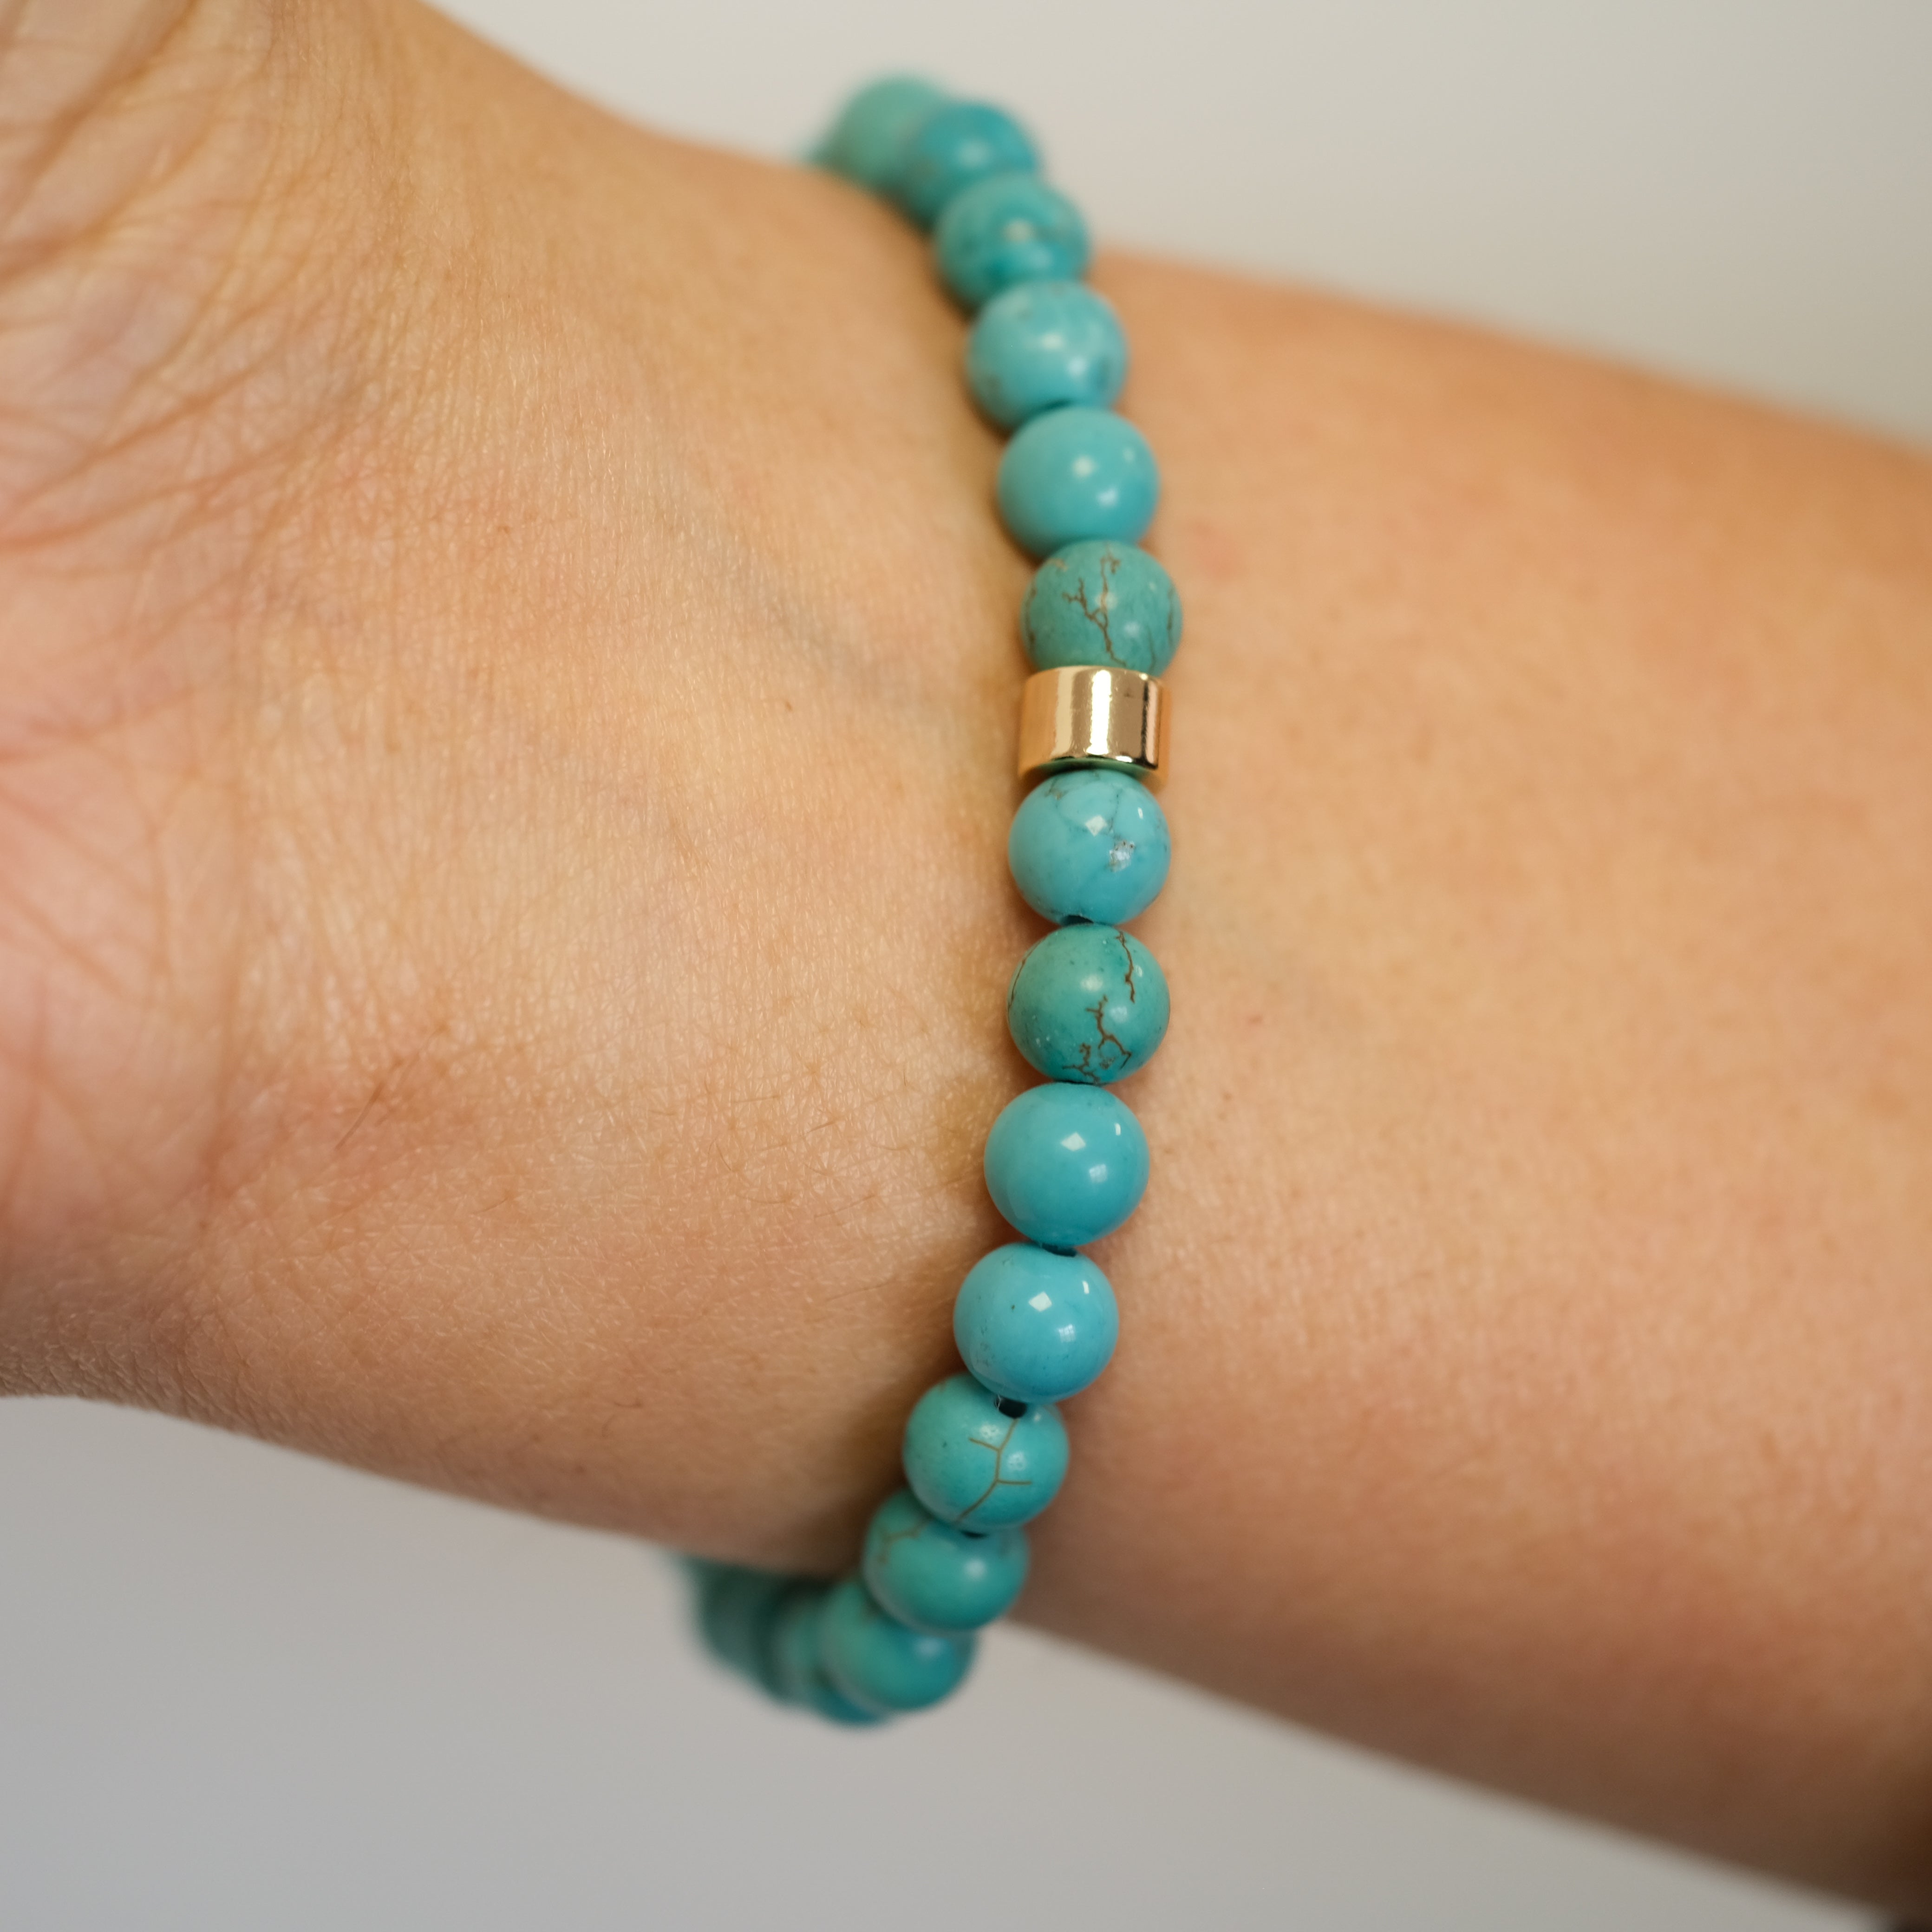 A turquoise gemstone bracelet in 6mm beads worn on a model's wrist from behind